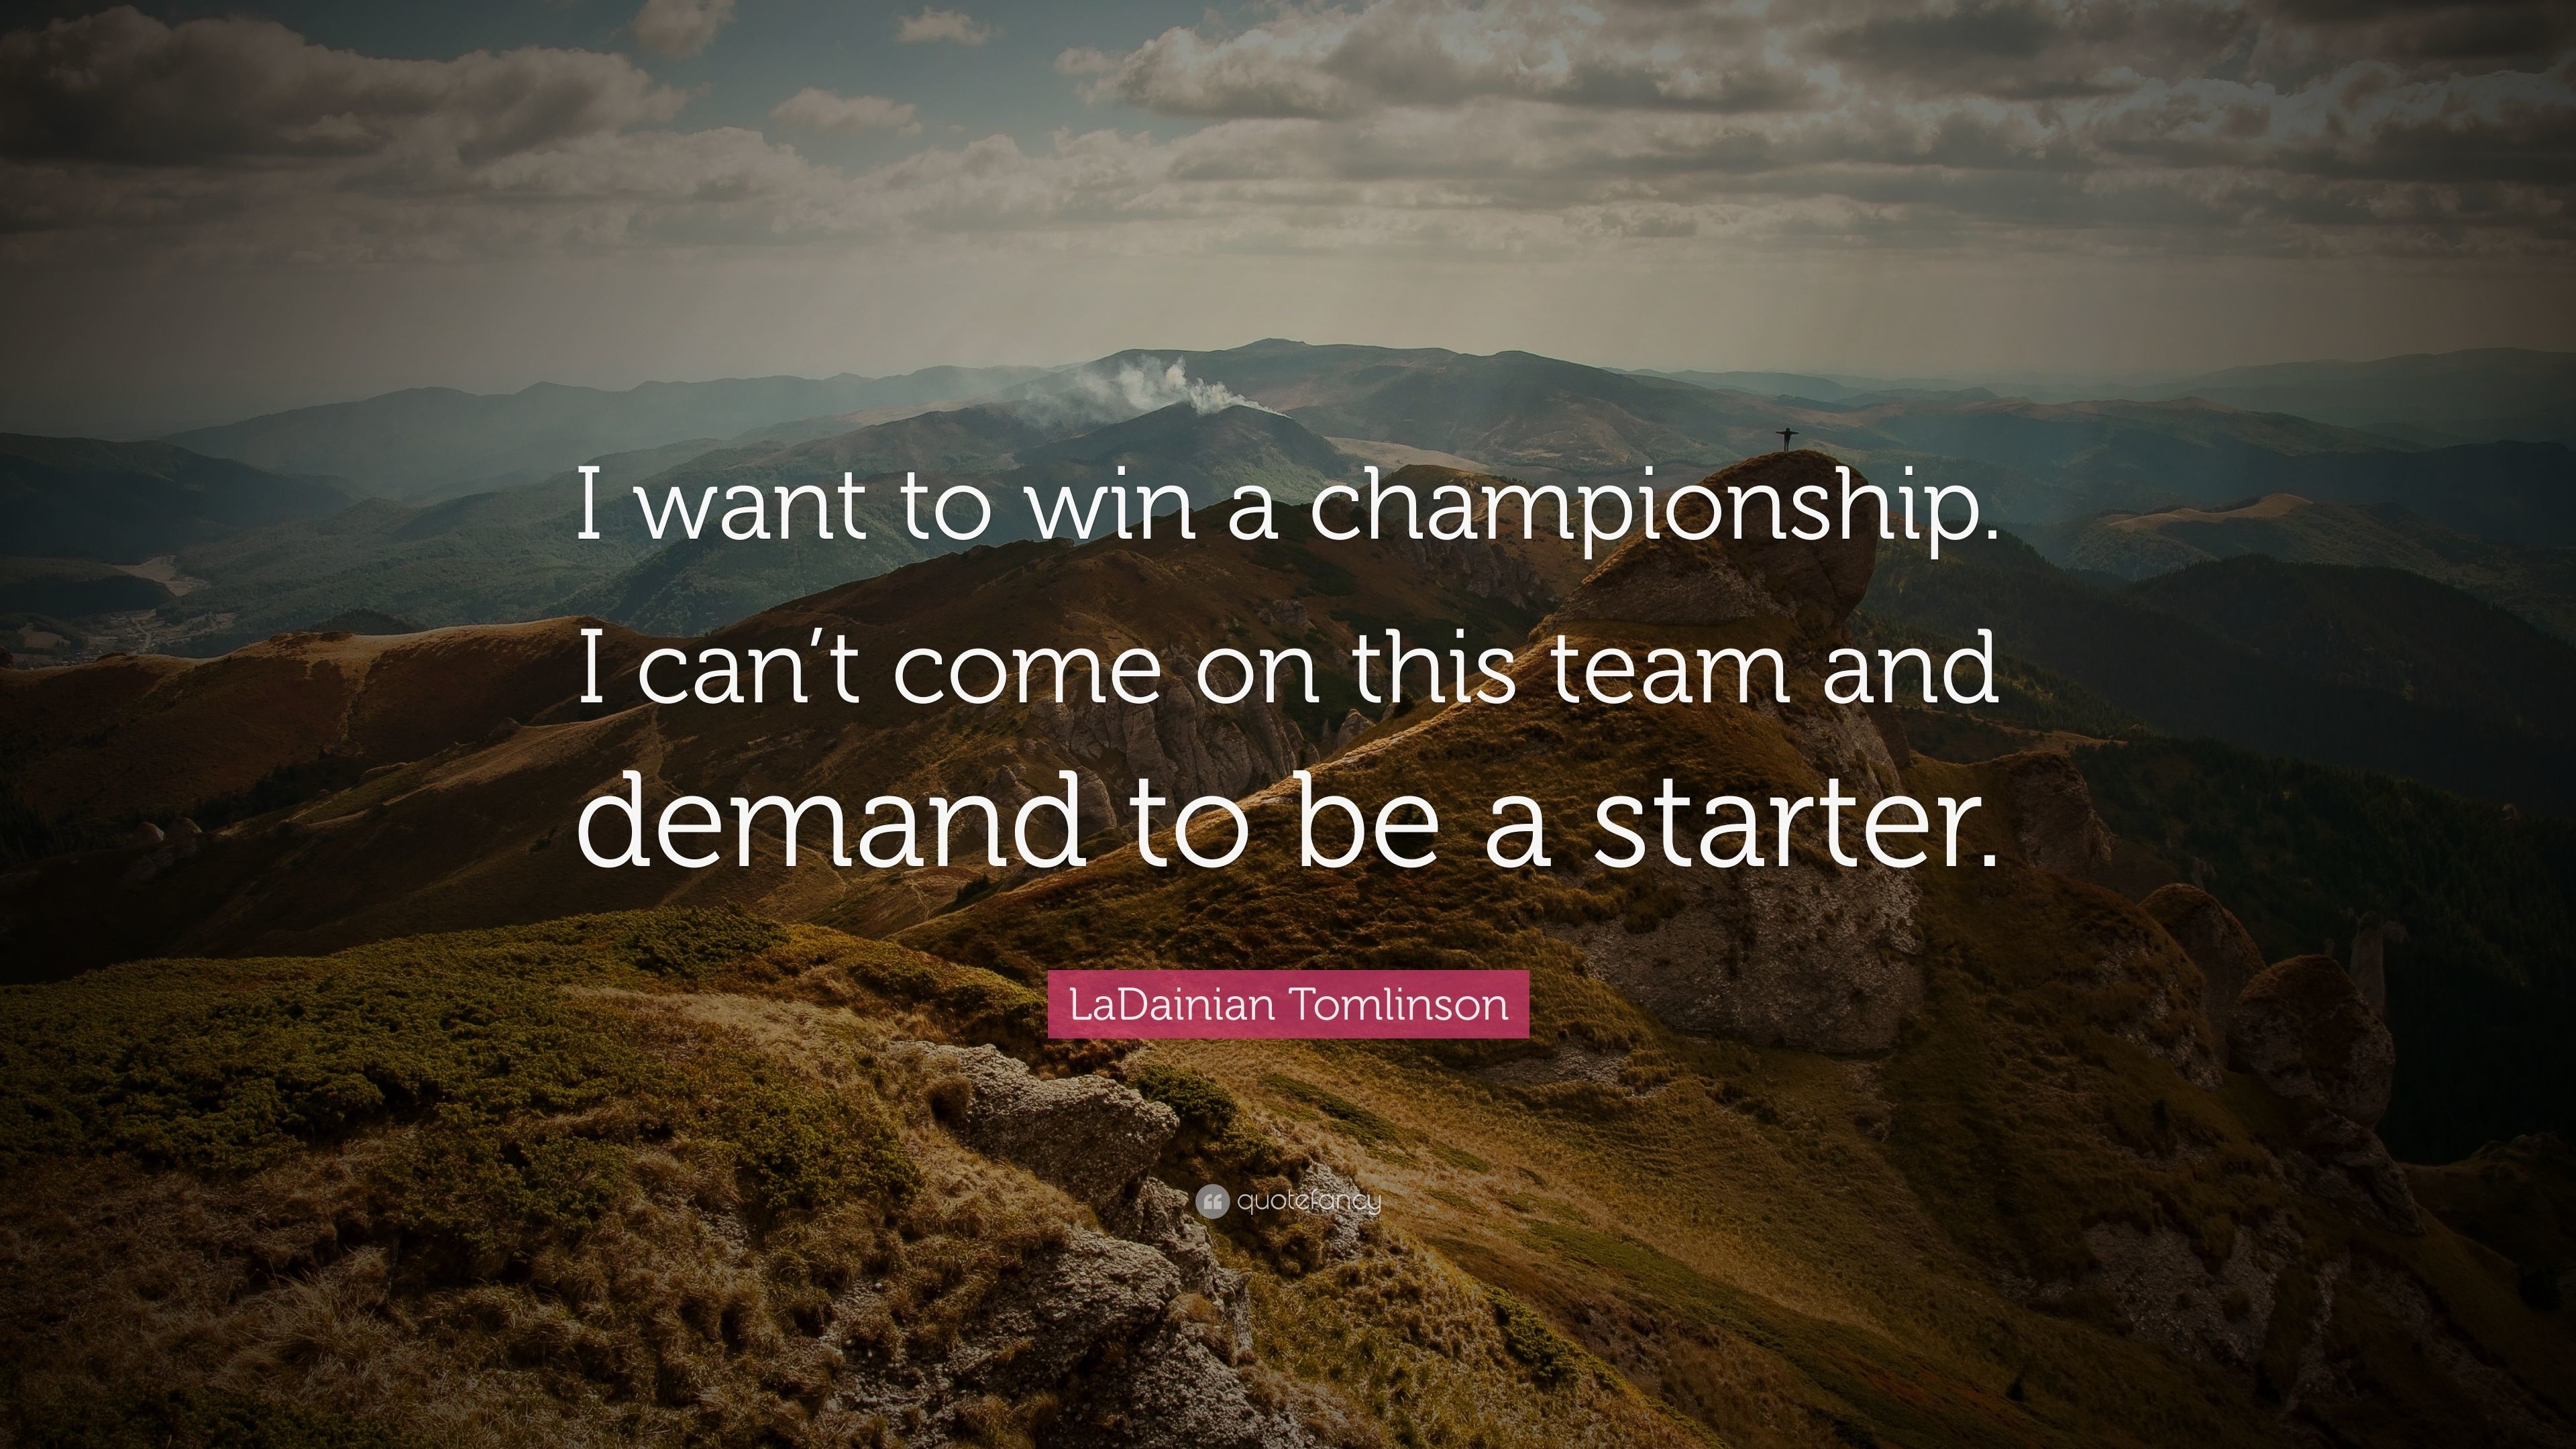 3840x2160 LaDainian Tomlinson Quote: “I want to win a championship. I can't